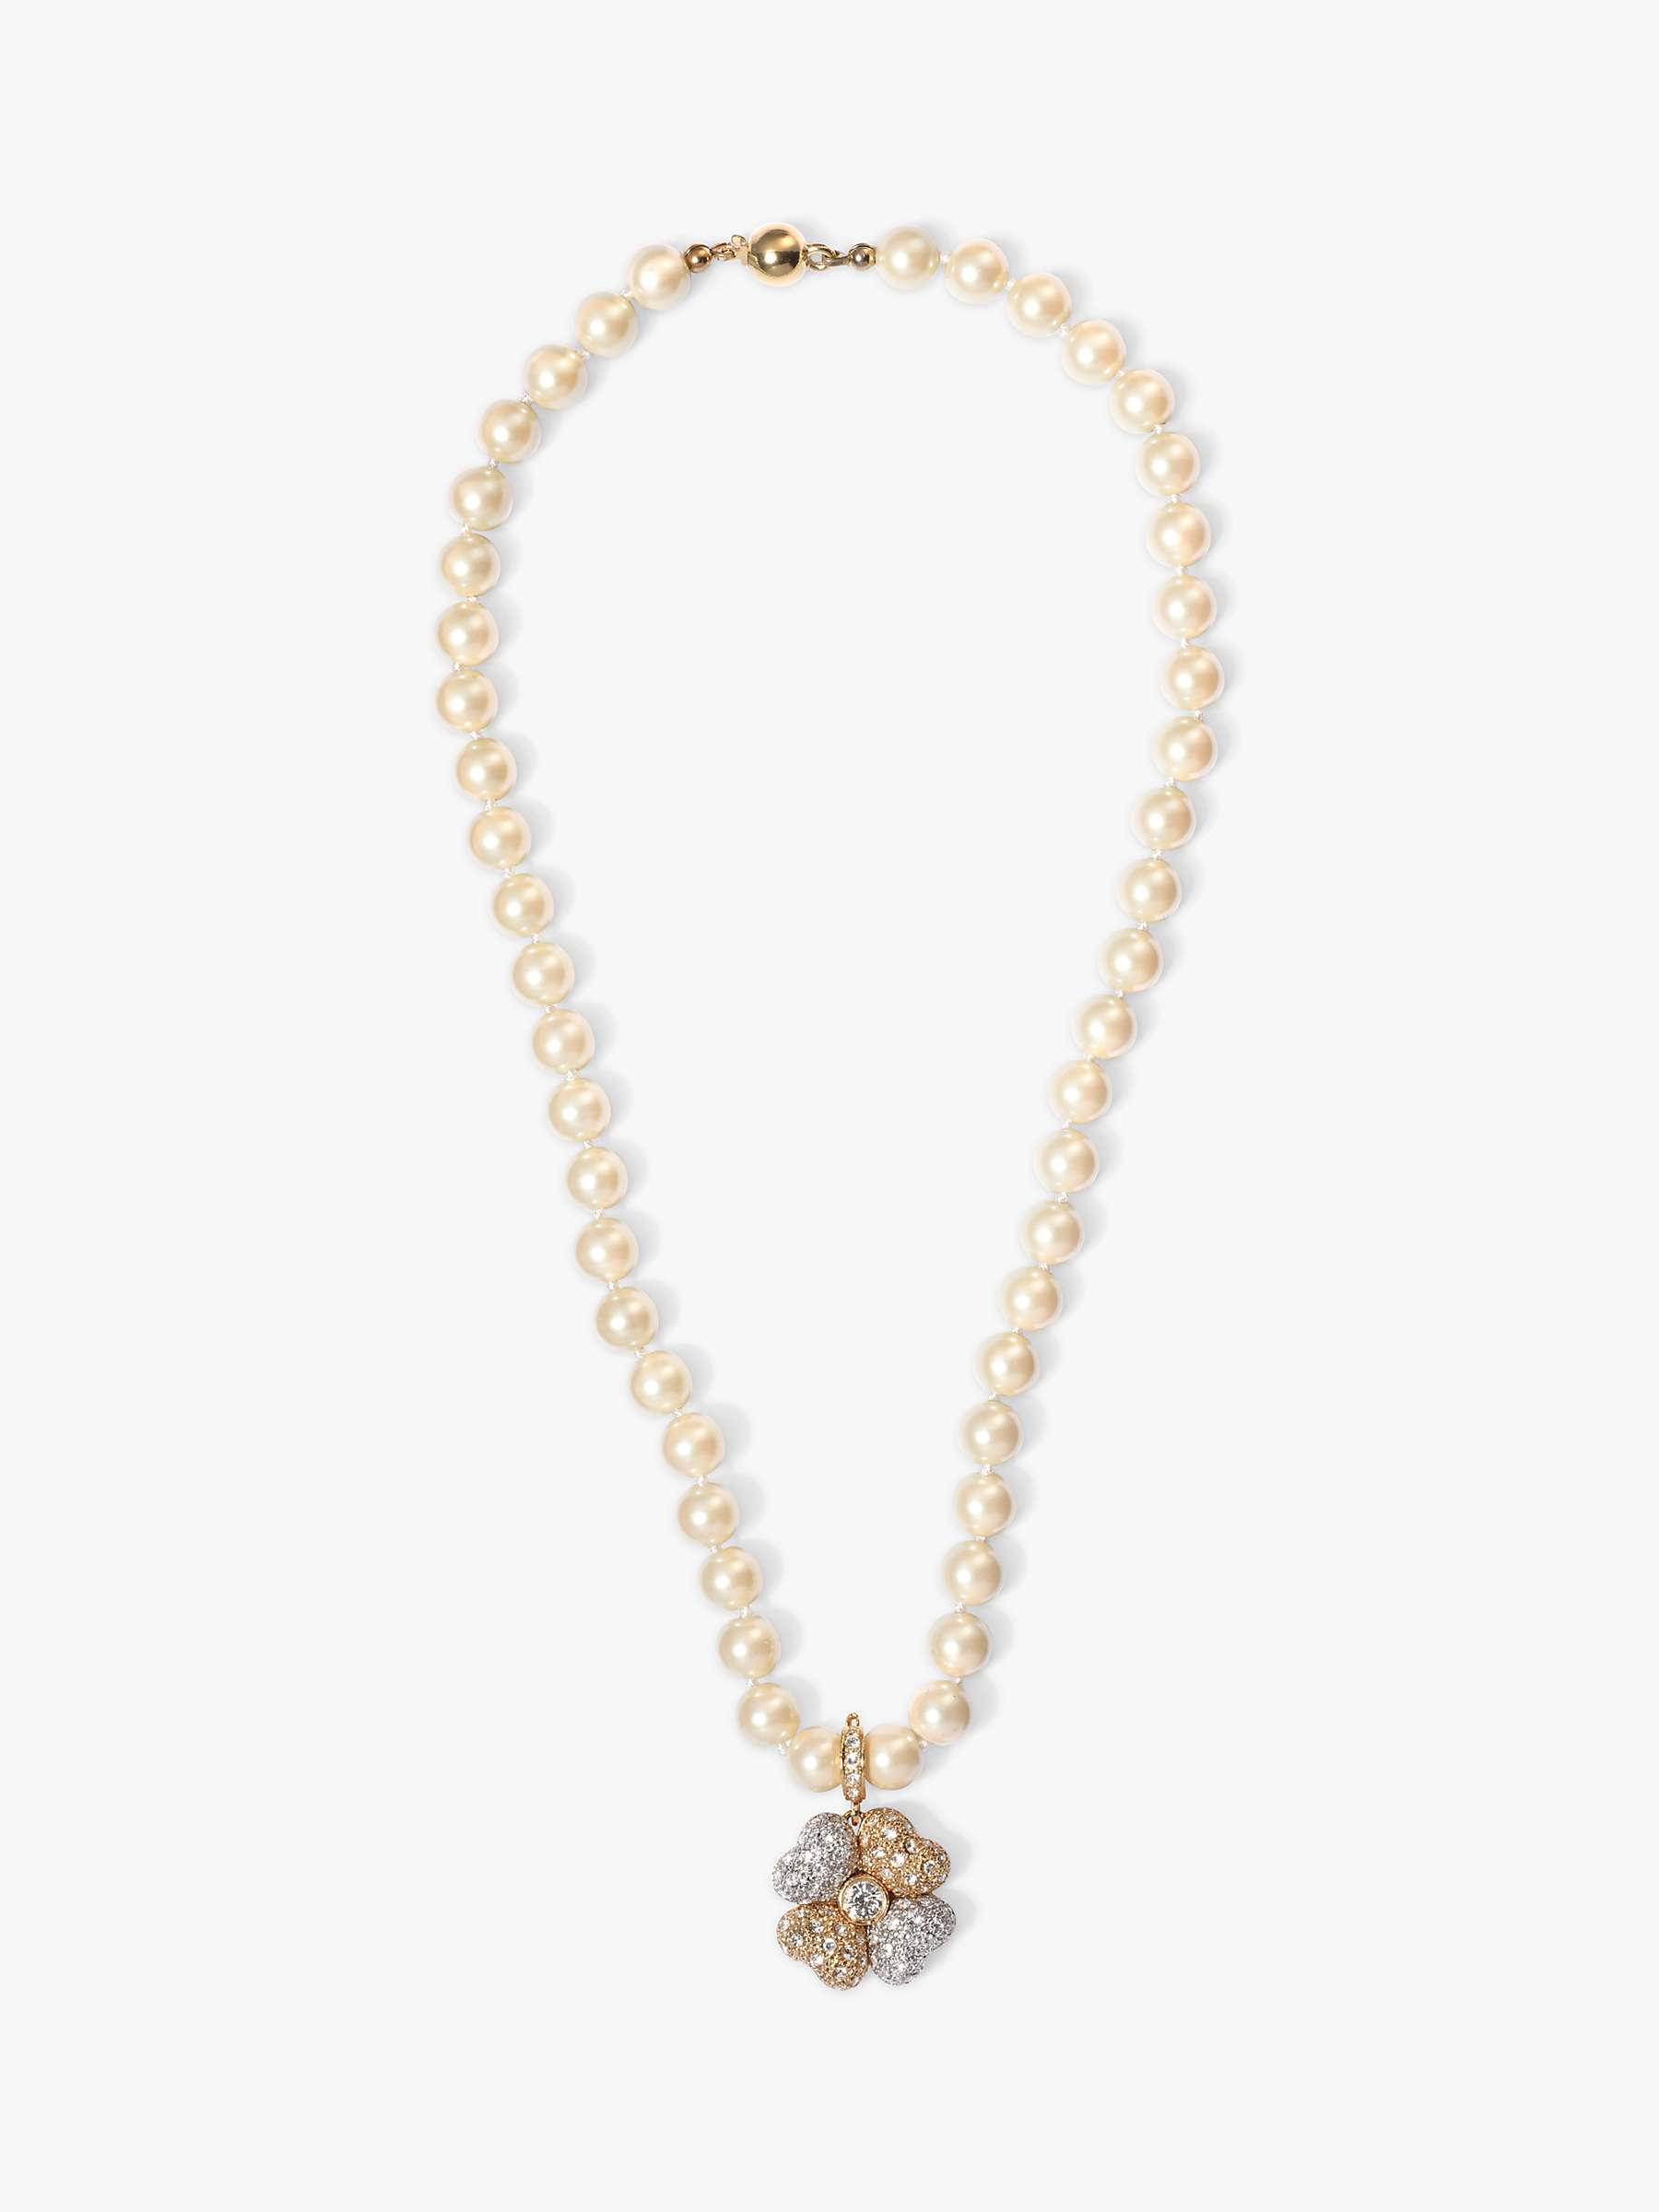 Buy Eclectica Vintage 18ct Gold Plated Faux Pearl and Swarovski Flower Beaded Necklace, Cream/Gold Online at johnlewis.com